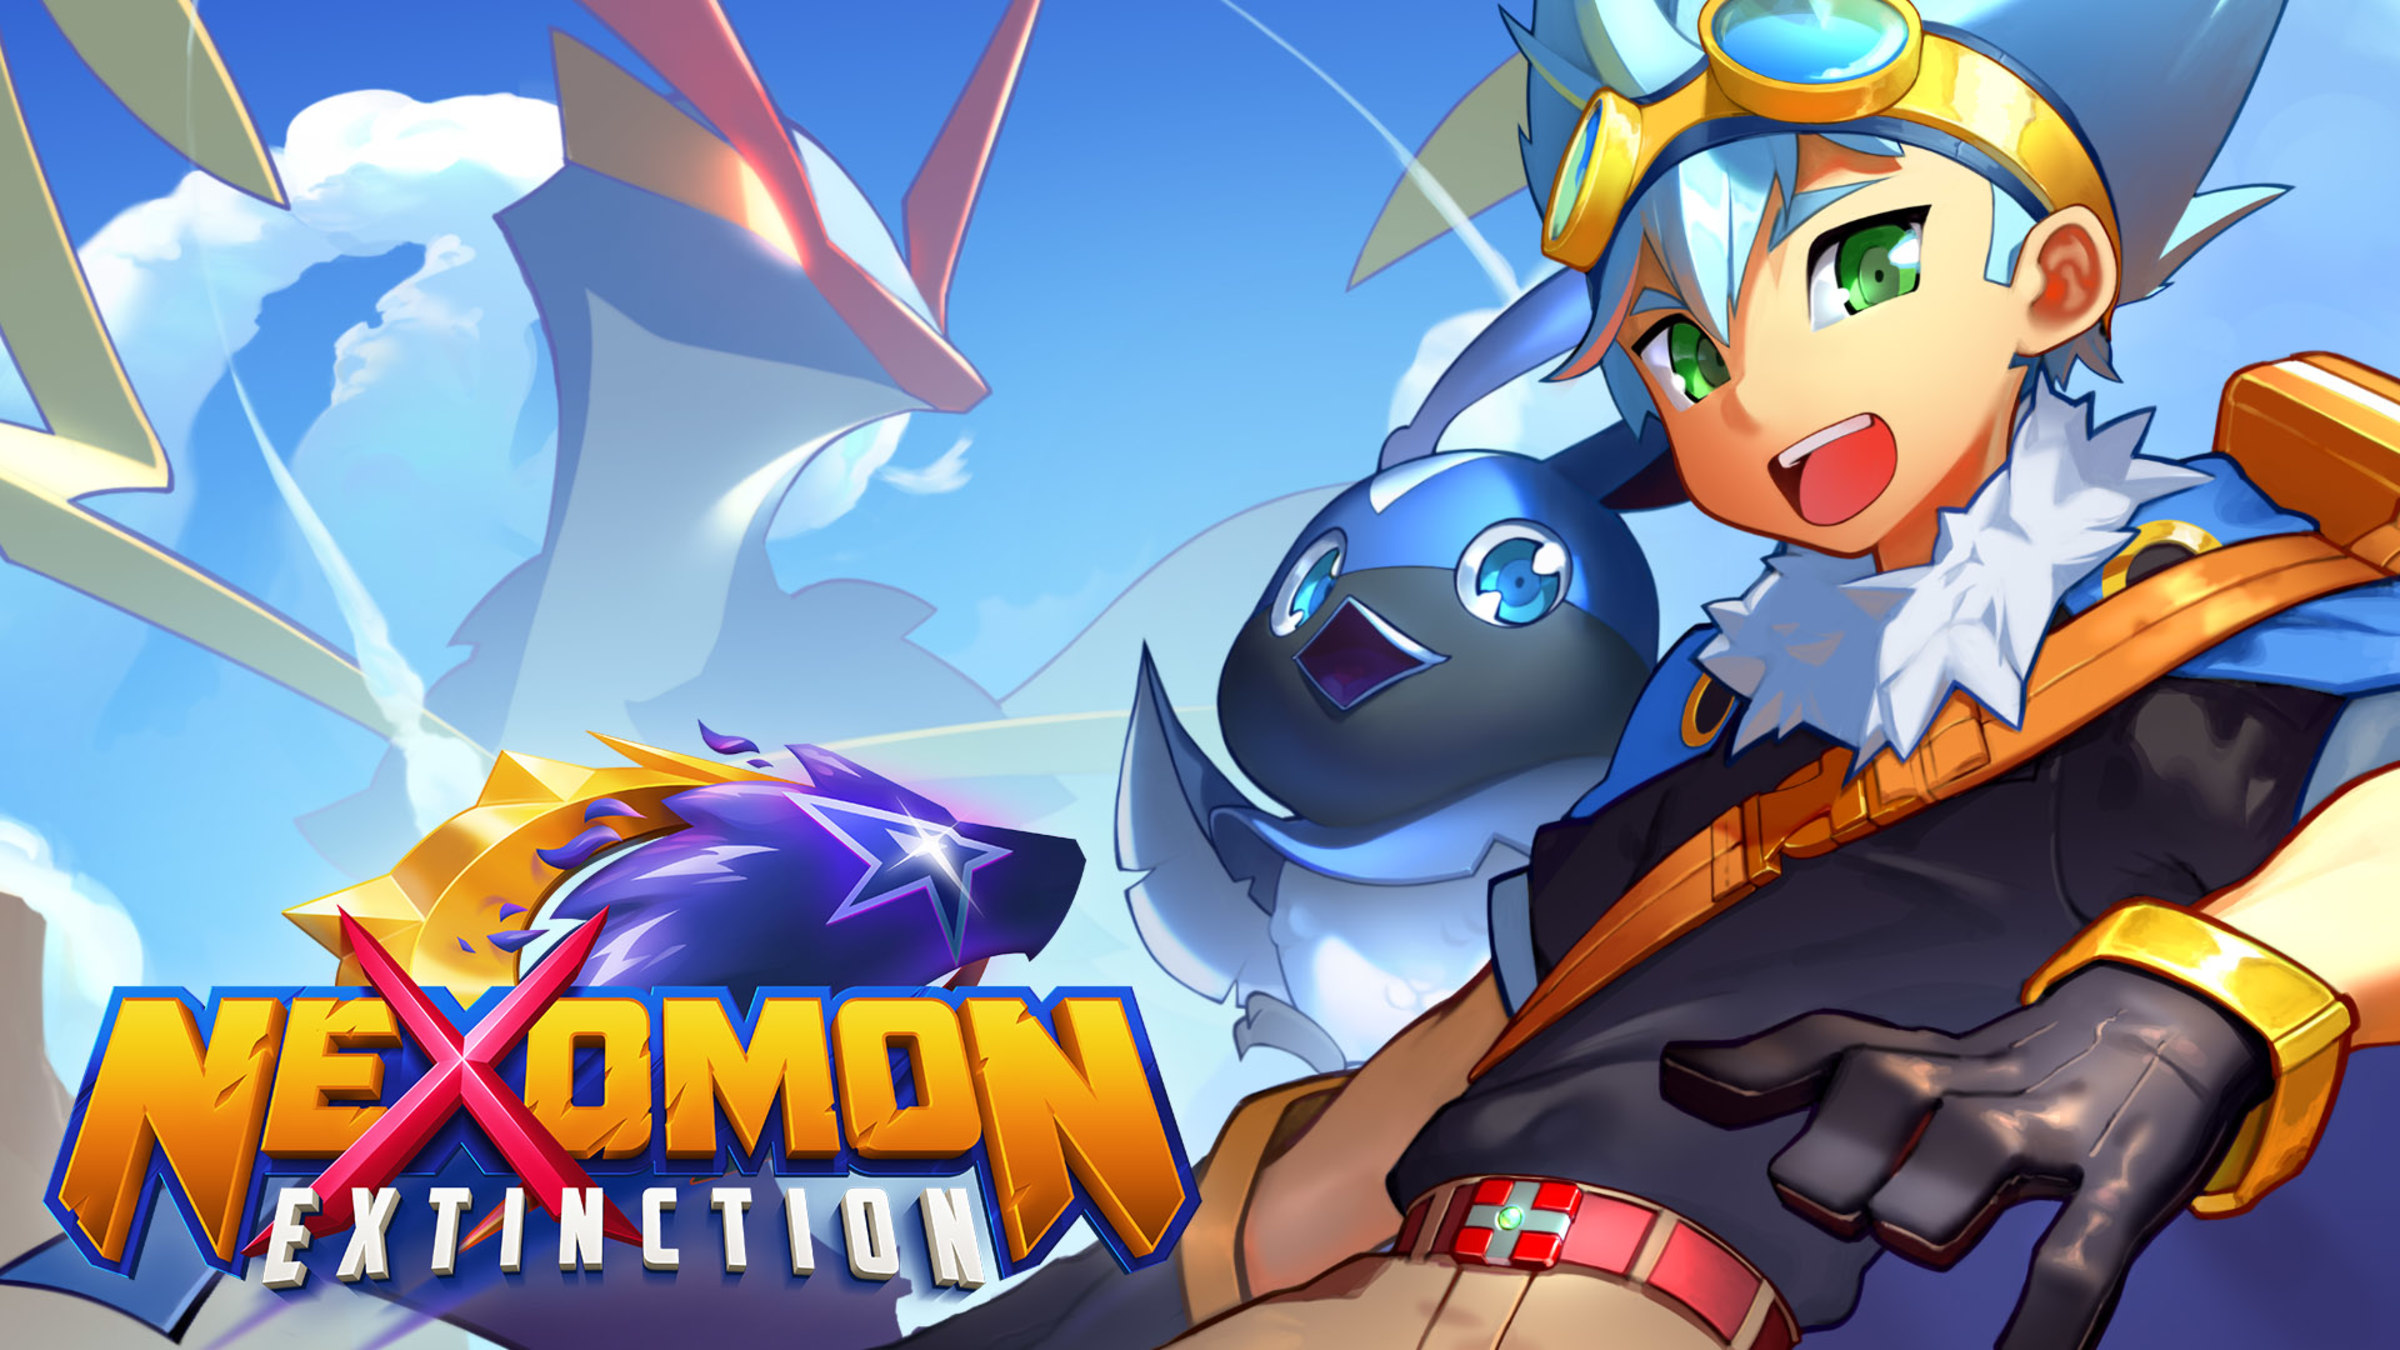 Nexomon: Extinction | Download and Buy Today - Epic Games Store